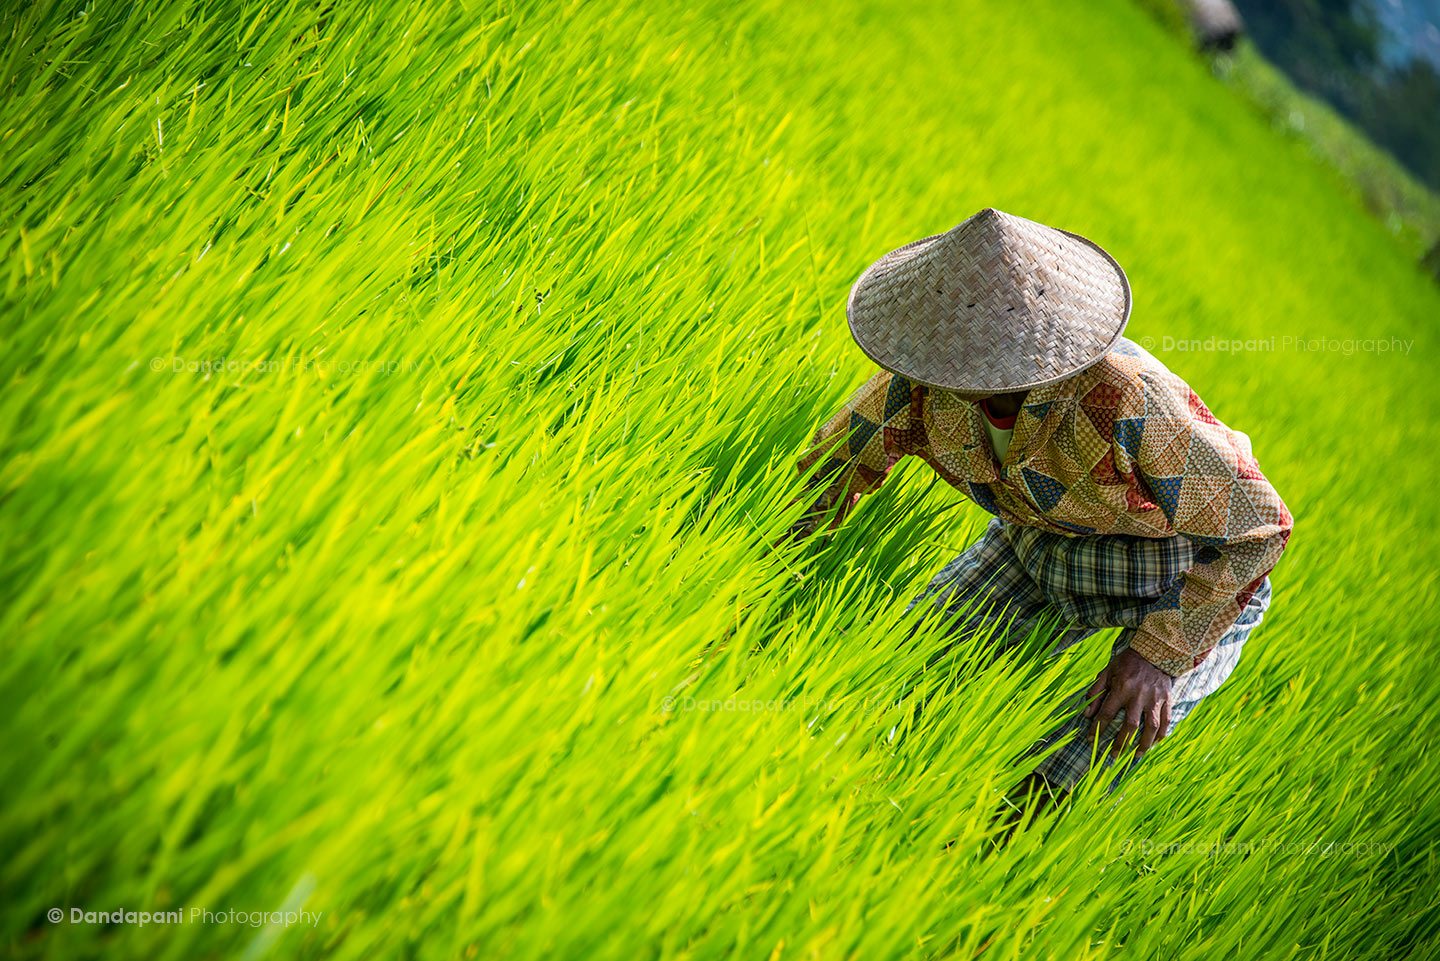 Central Java has unending rice paddy fields. The green is gorgeous and landscape breathtaking.